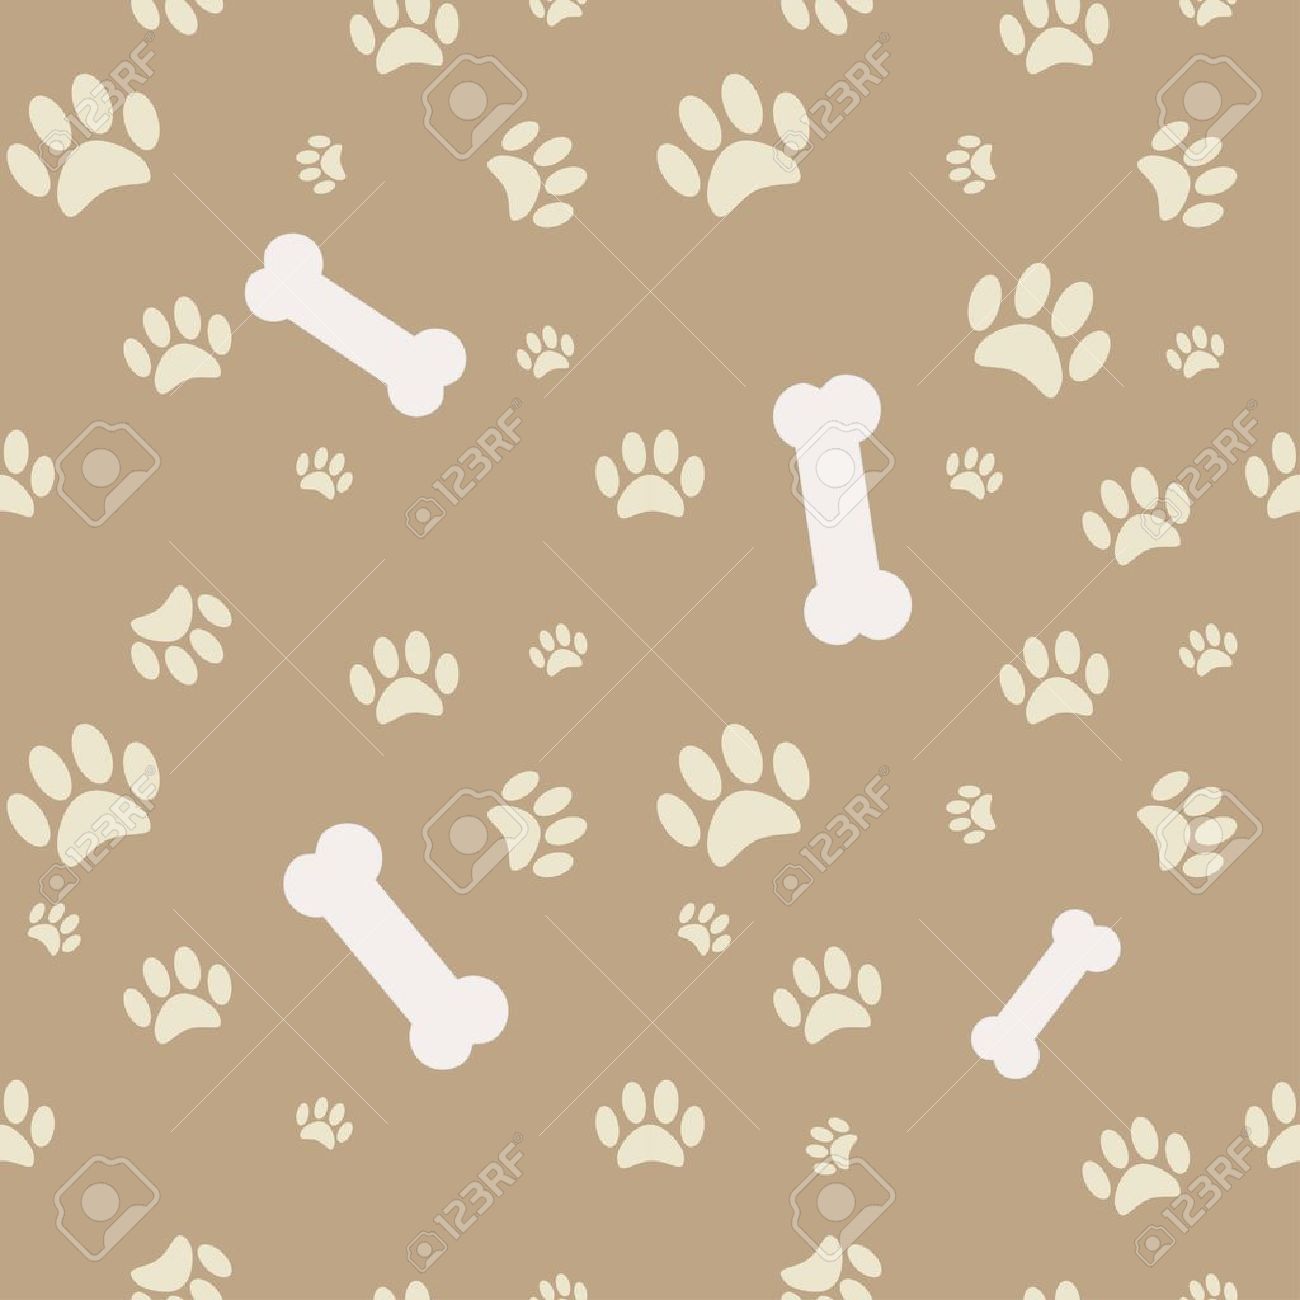 Background With Dog Paw Print And Bone In Brown Royalty